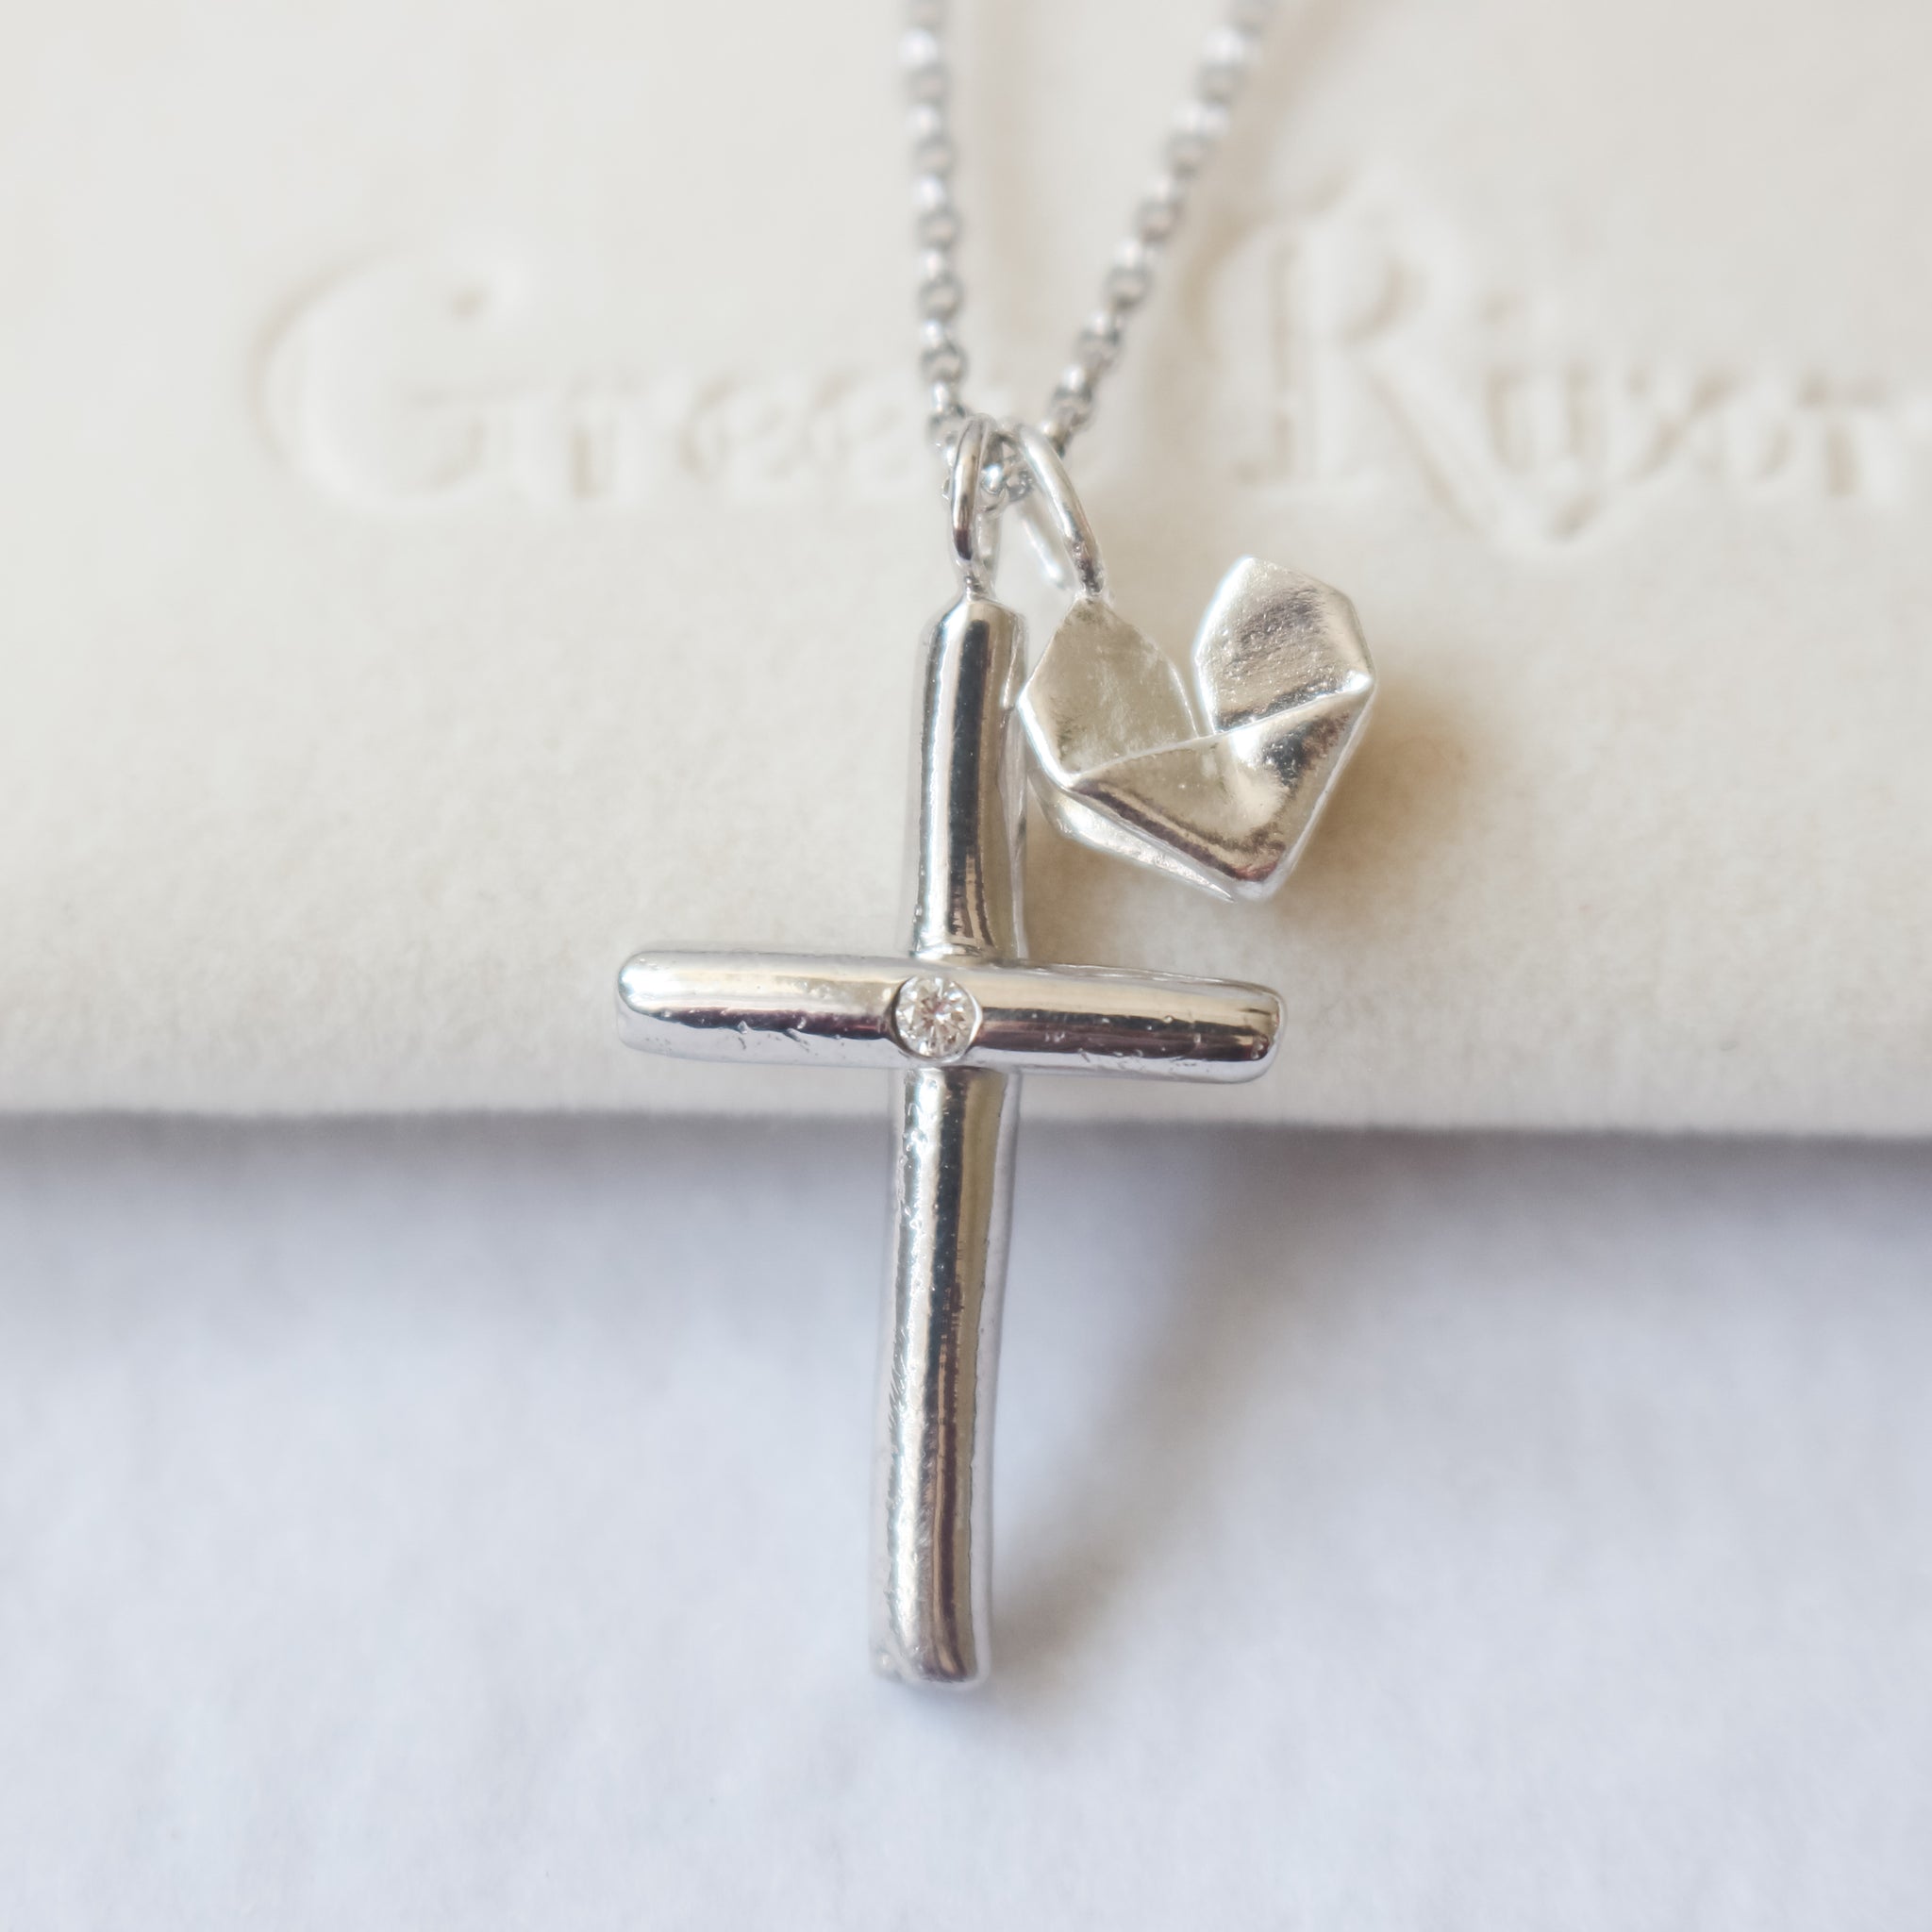 Cross with Heart - Sterling Silver Diamond Cross Necklace (Big) Plain or Engraved with Origami Heart